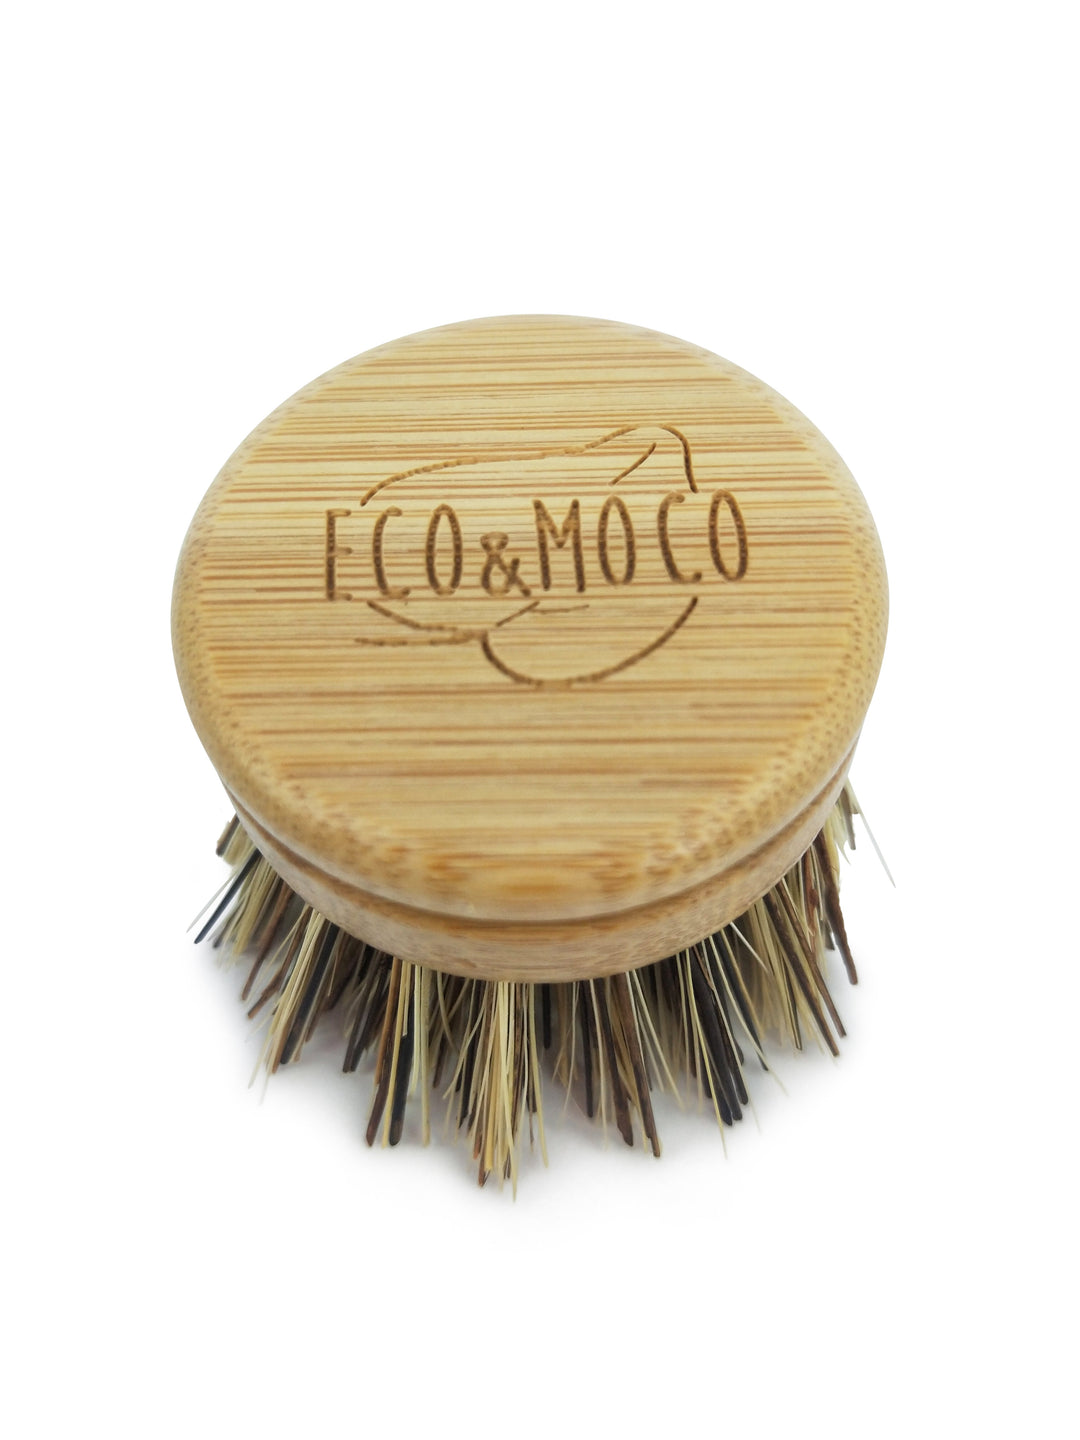 Dishwashing Brush Replacement Head from Eco and Moco